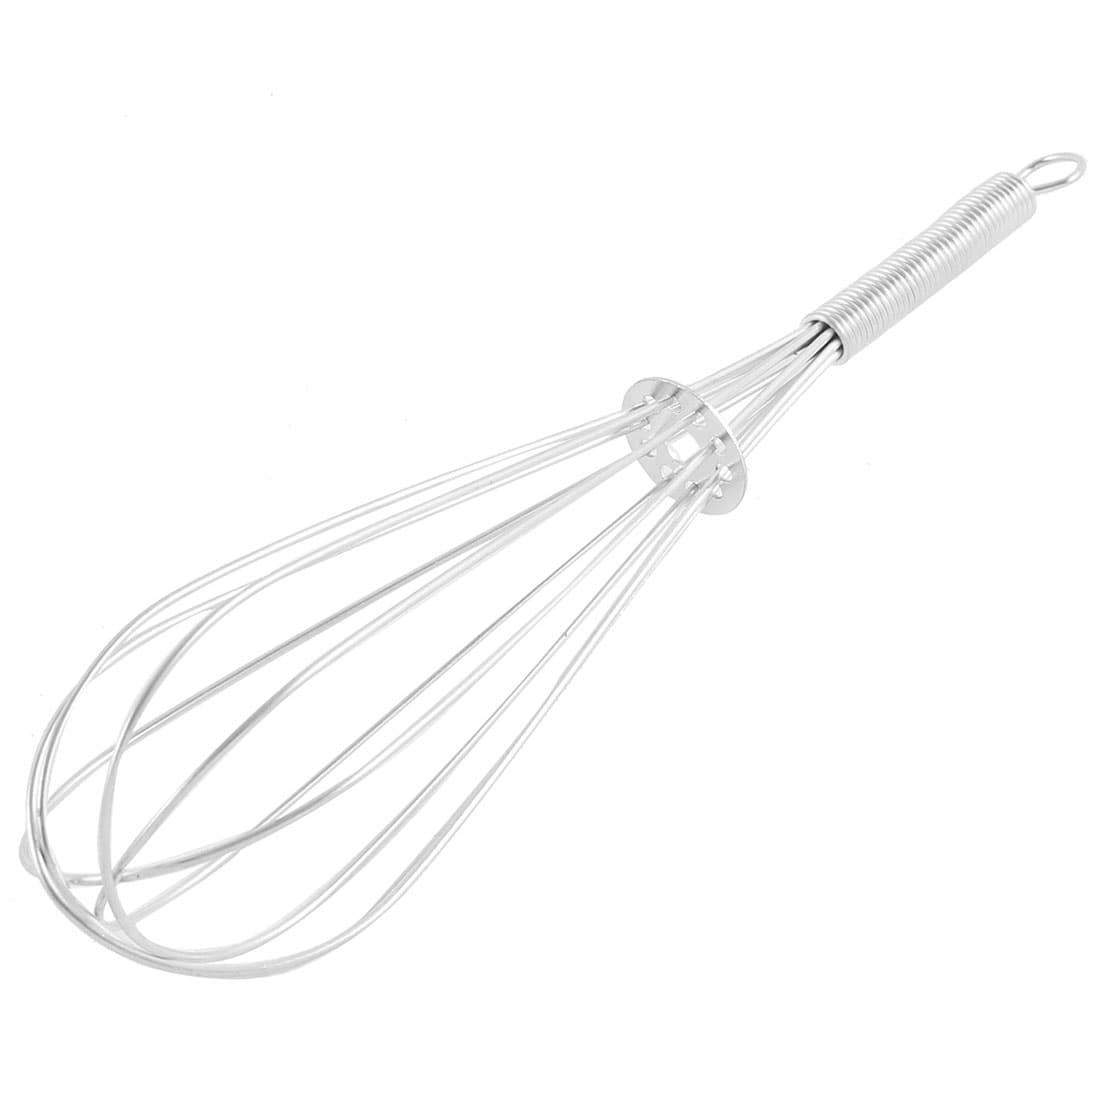 https://ak1.ostkcdn.com/images/products/is/images/direct/5188aaf1df70f57e7efc63e7ae23368d9d258f73/Stainless-Steel-Handle-Wire-Whisk-Stirrer-Mixer-Egg-Beater-18cm-Long.jpg